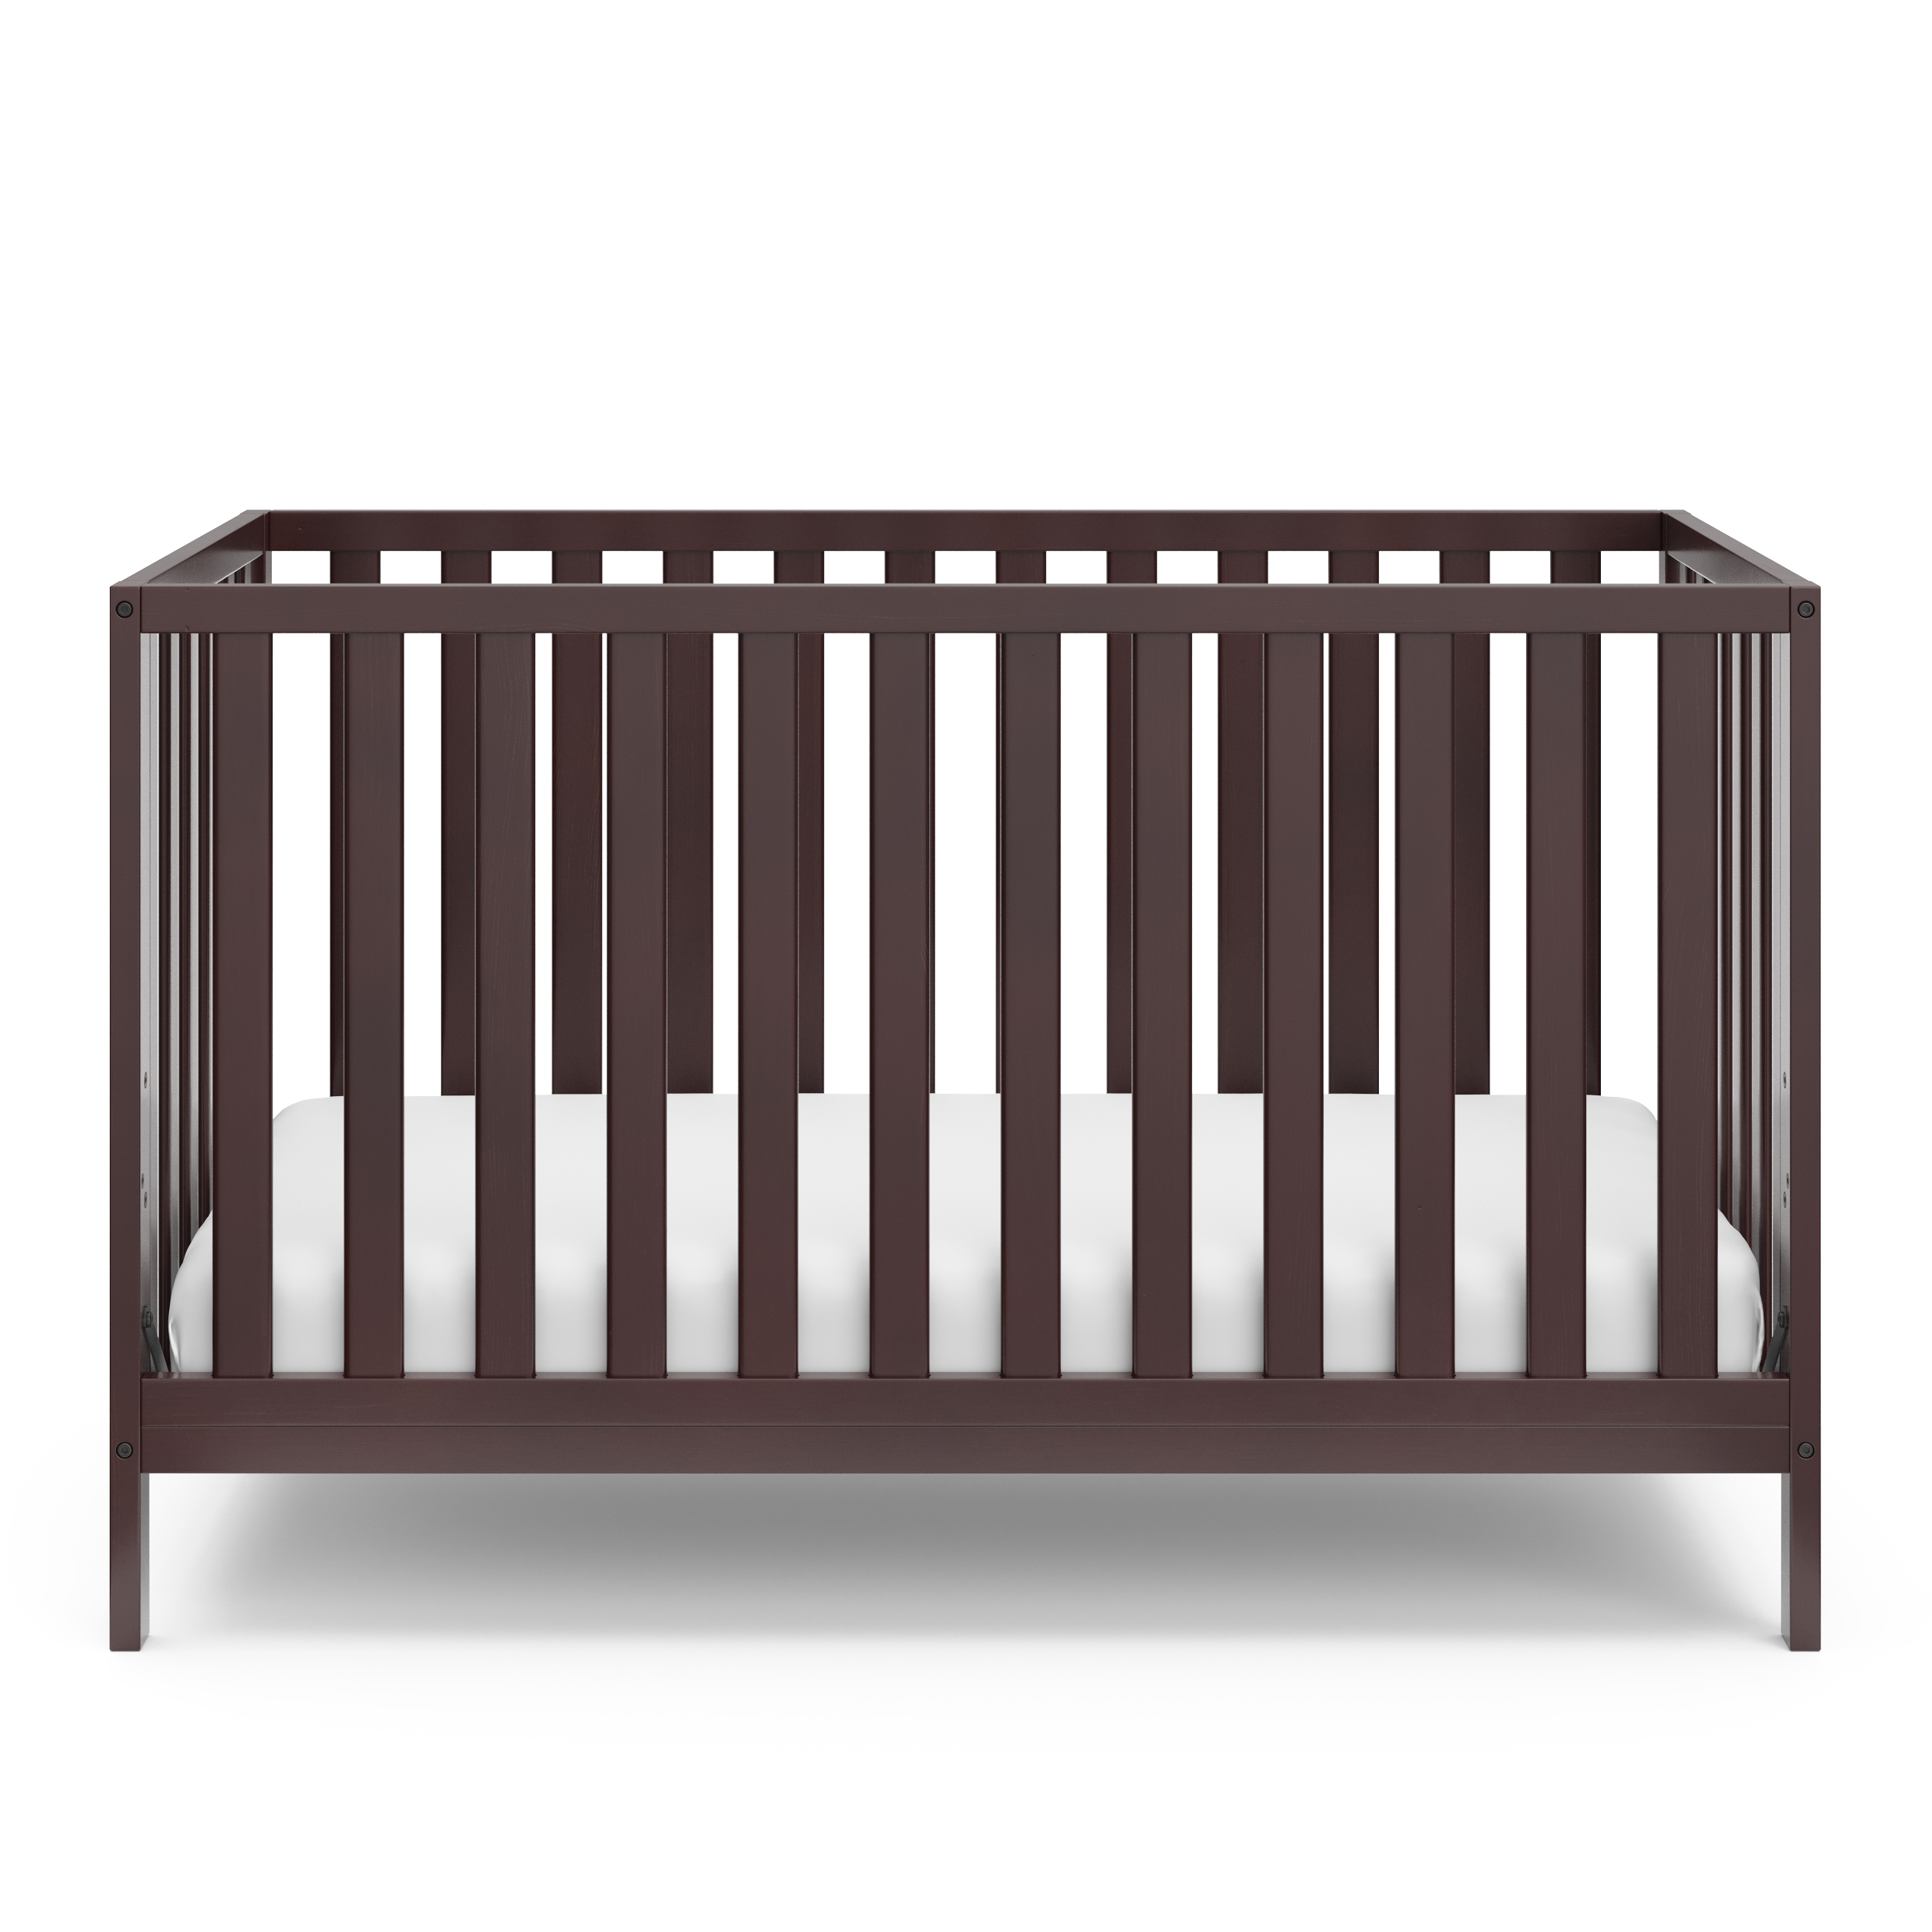 Storkcraft Sunset 4-in-1 Convertible Baby Crib, Espresso - image 4 of 8